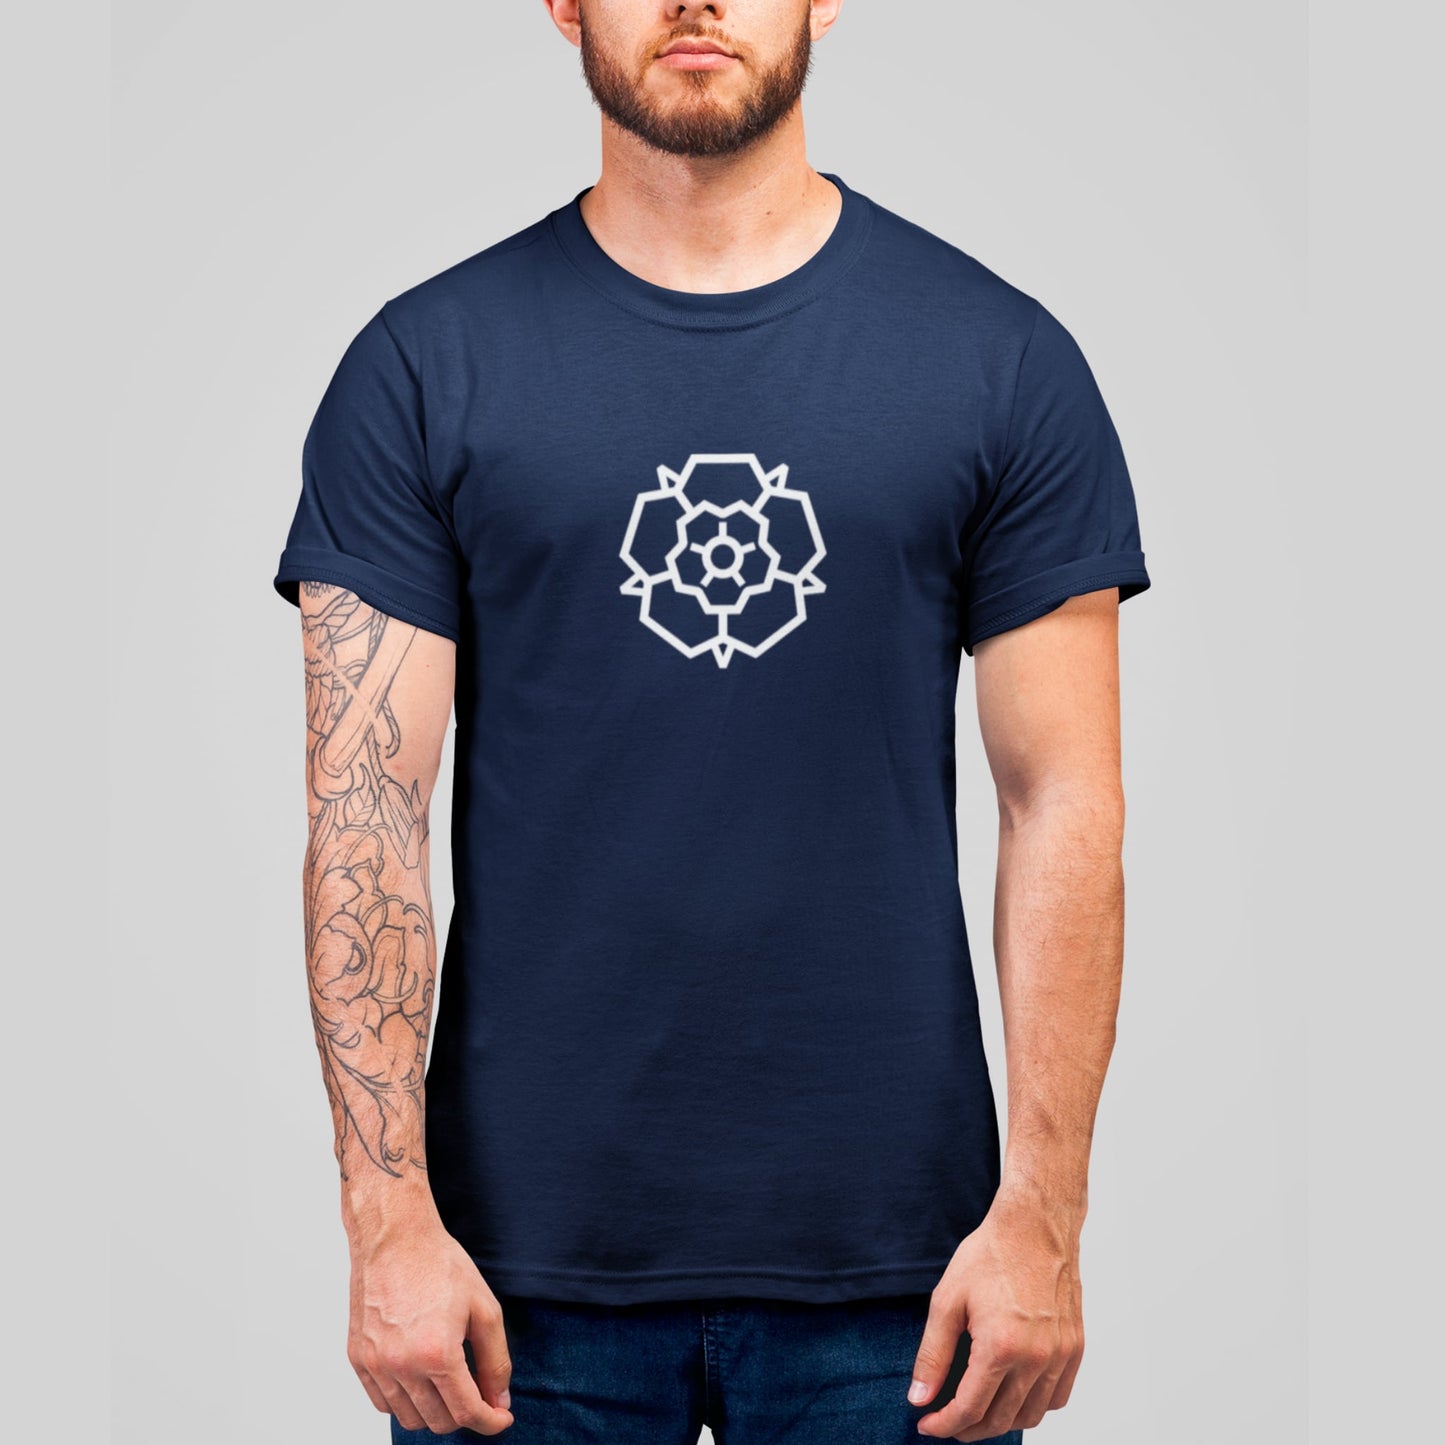 Yorkshire Rose Signature T-Shirt - The Great Yorkshire Shop